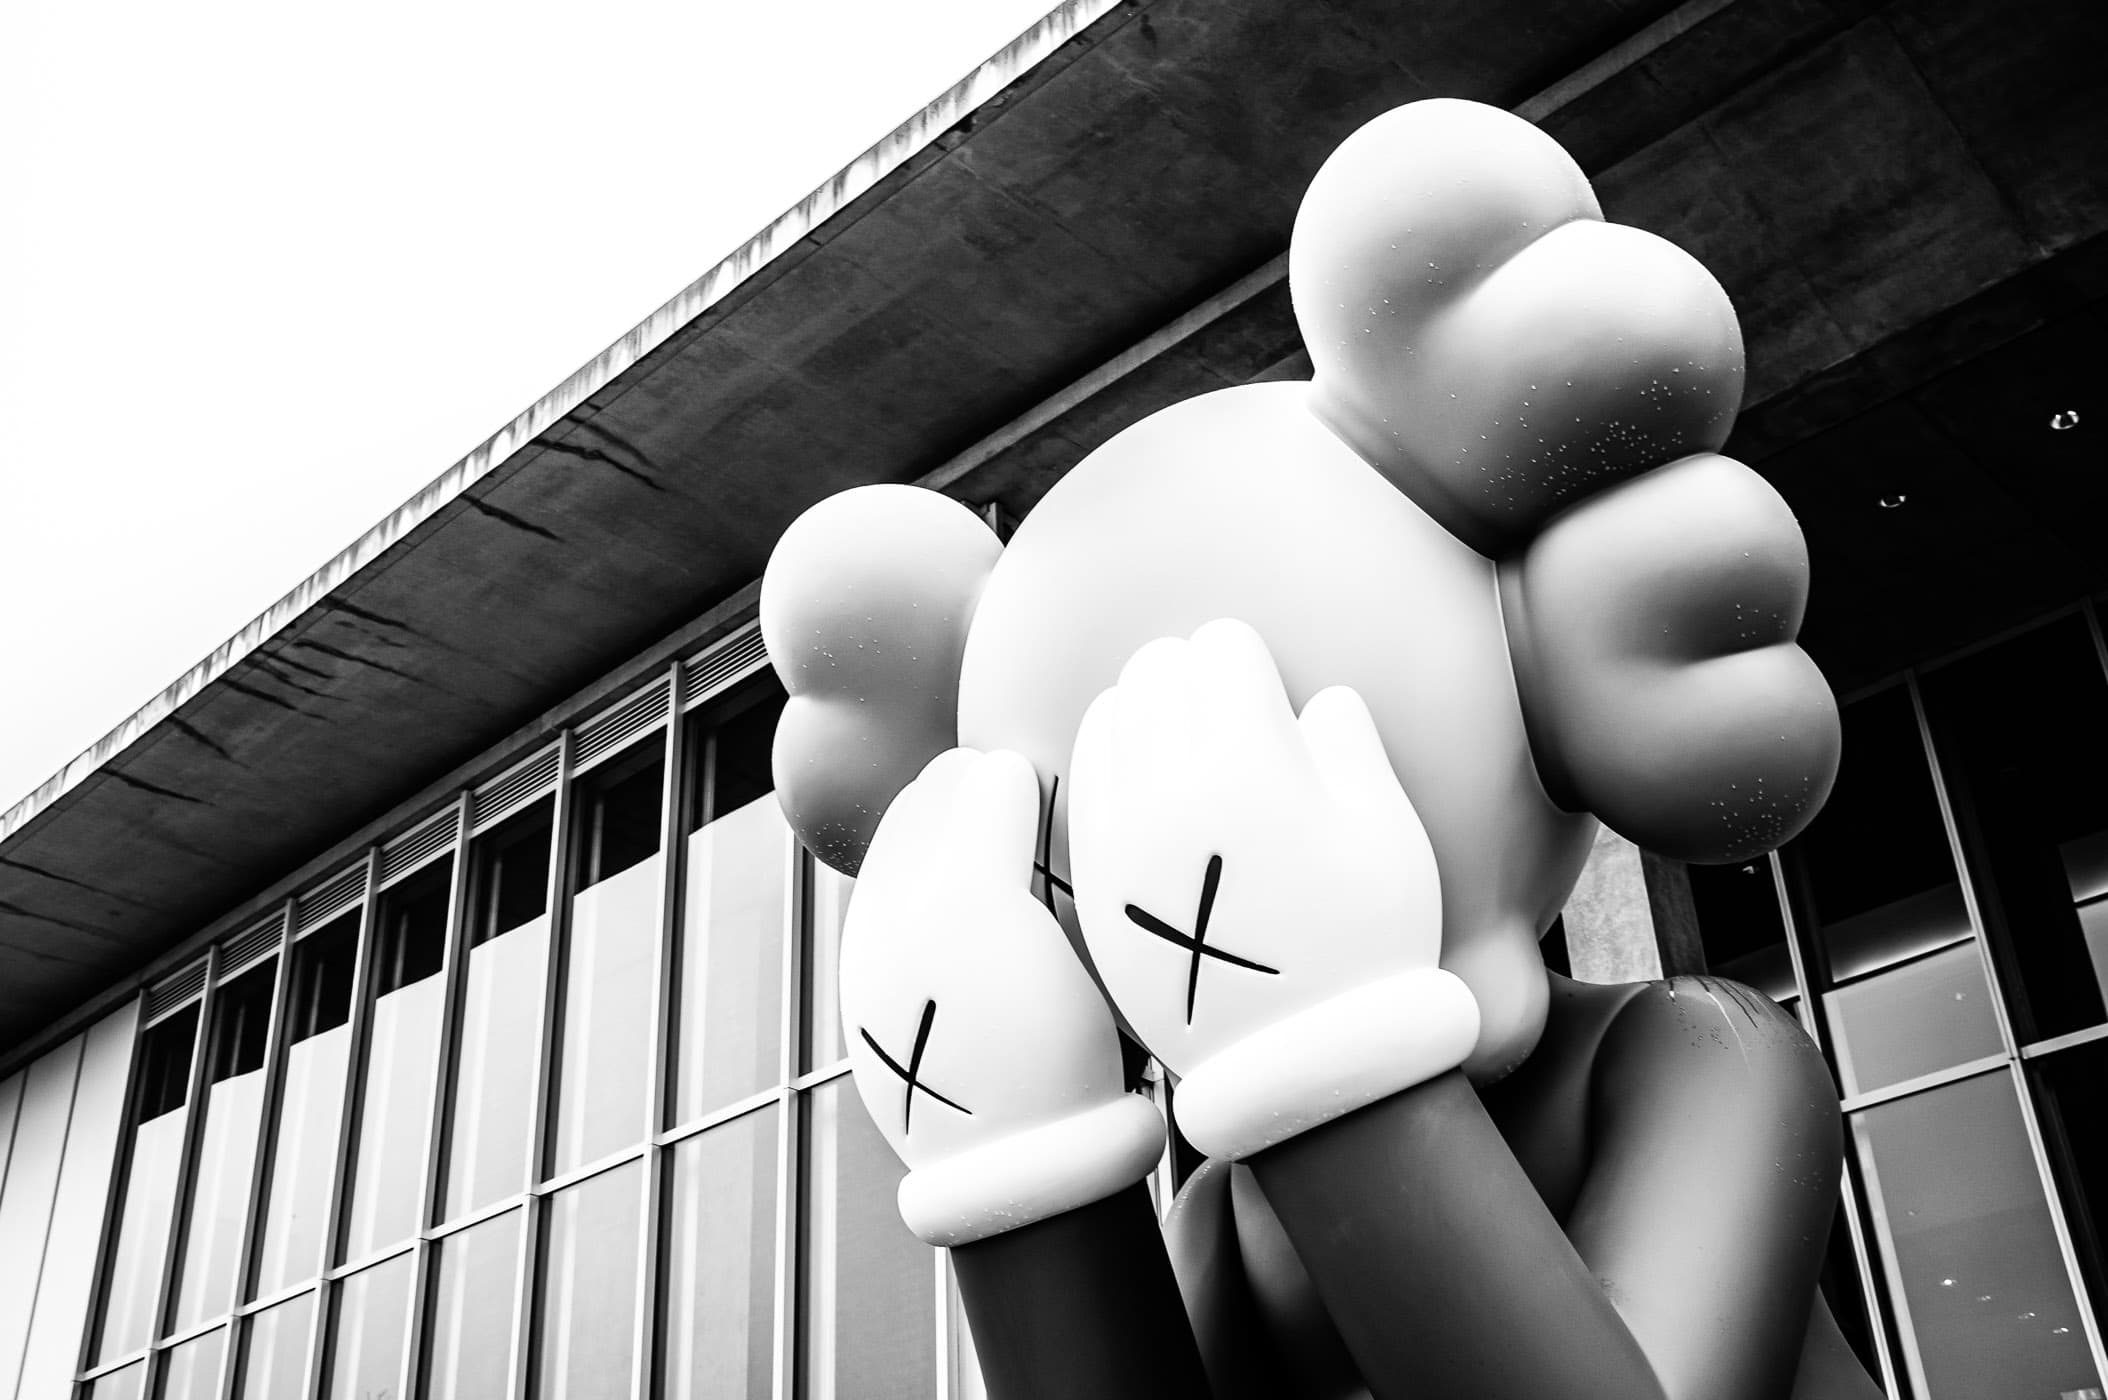 Companion (Passing Through) by American artist KAWS (Brian Donnelly), outside the Fort Worth Modern.